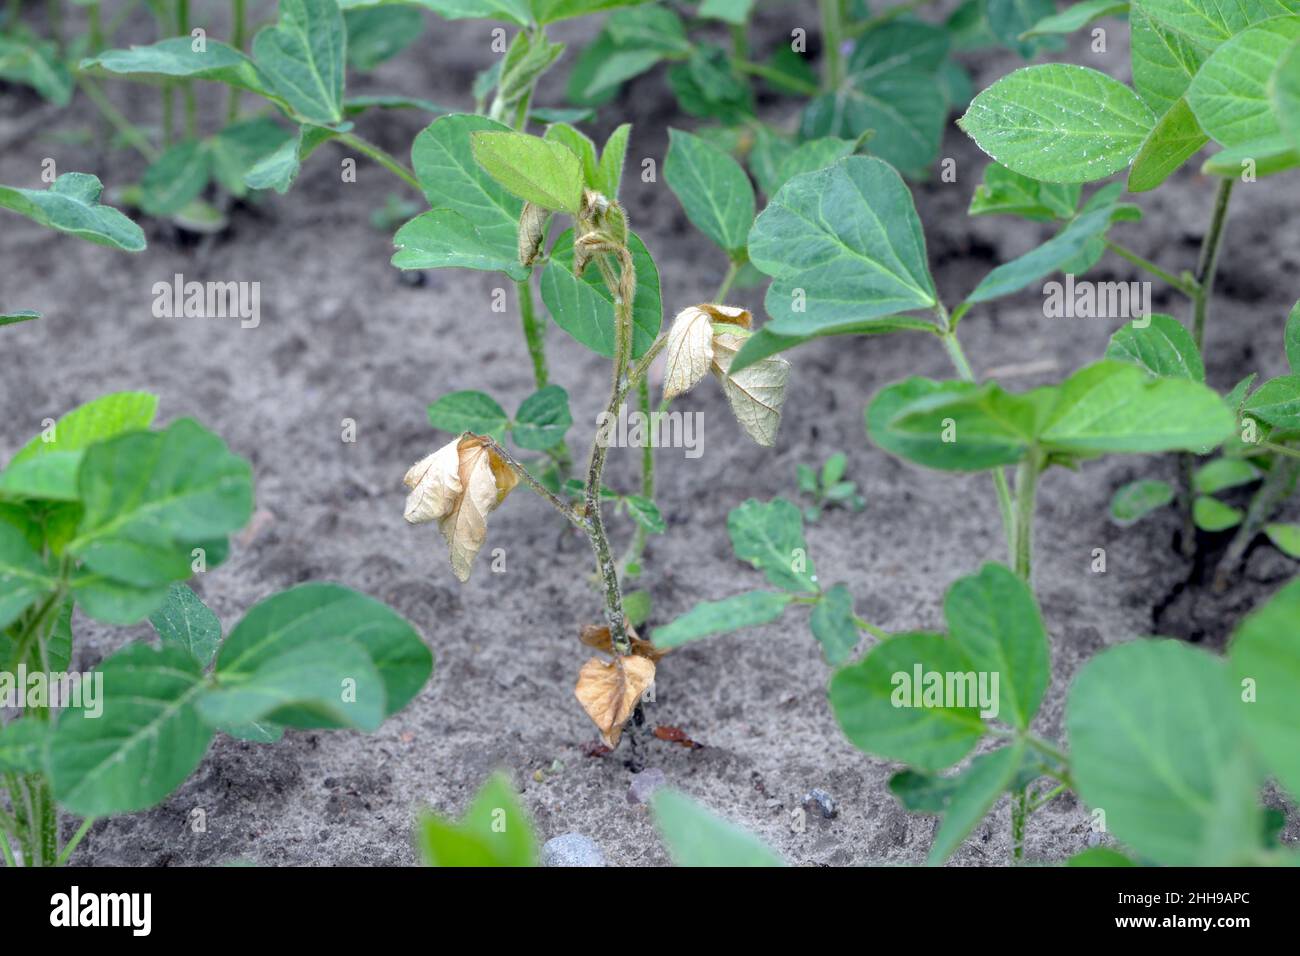 A shriveling soybean plant with an infected root in a field. Stock Photo